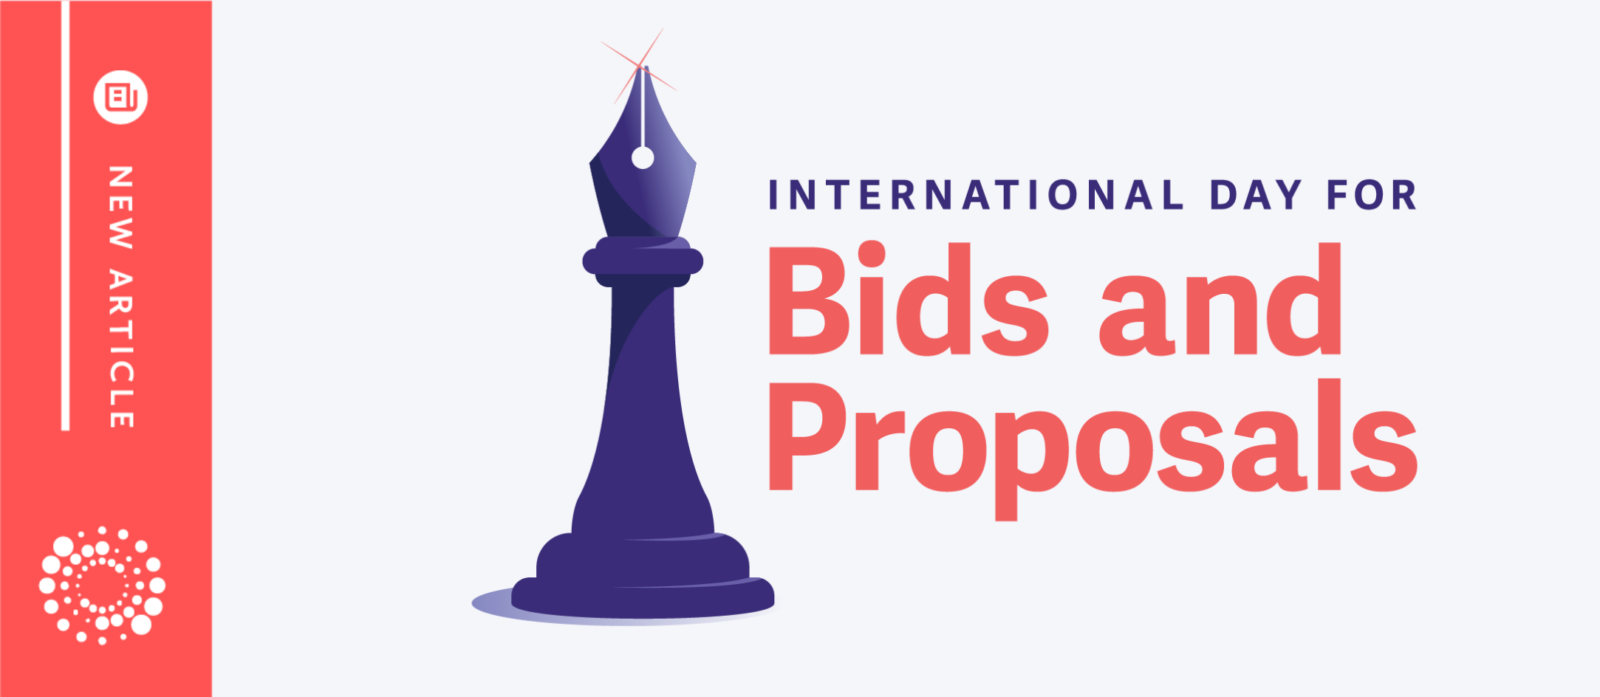 International Day of Bids and Proposals